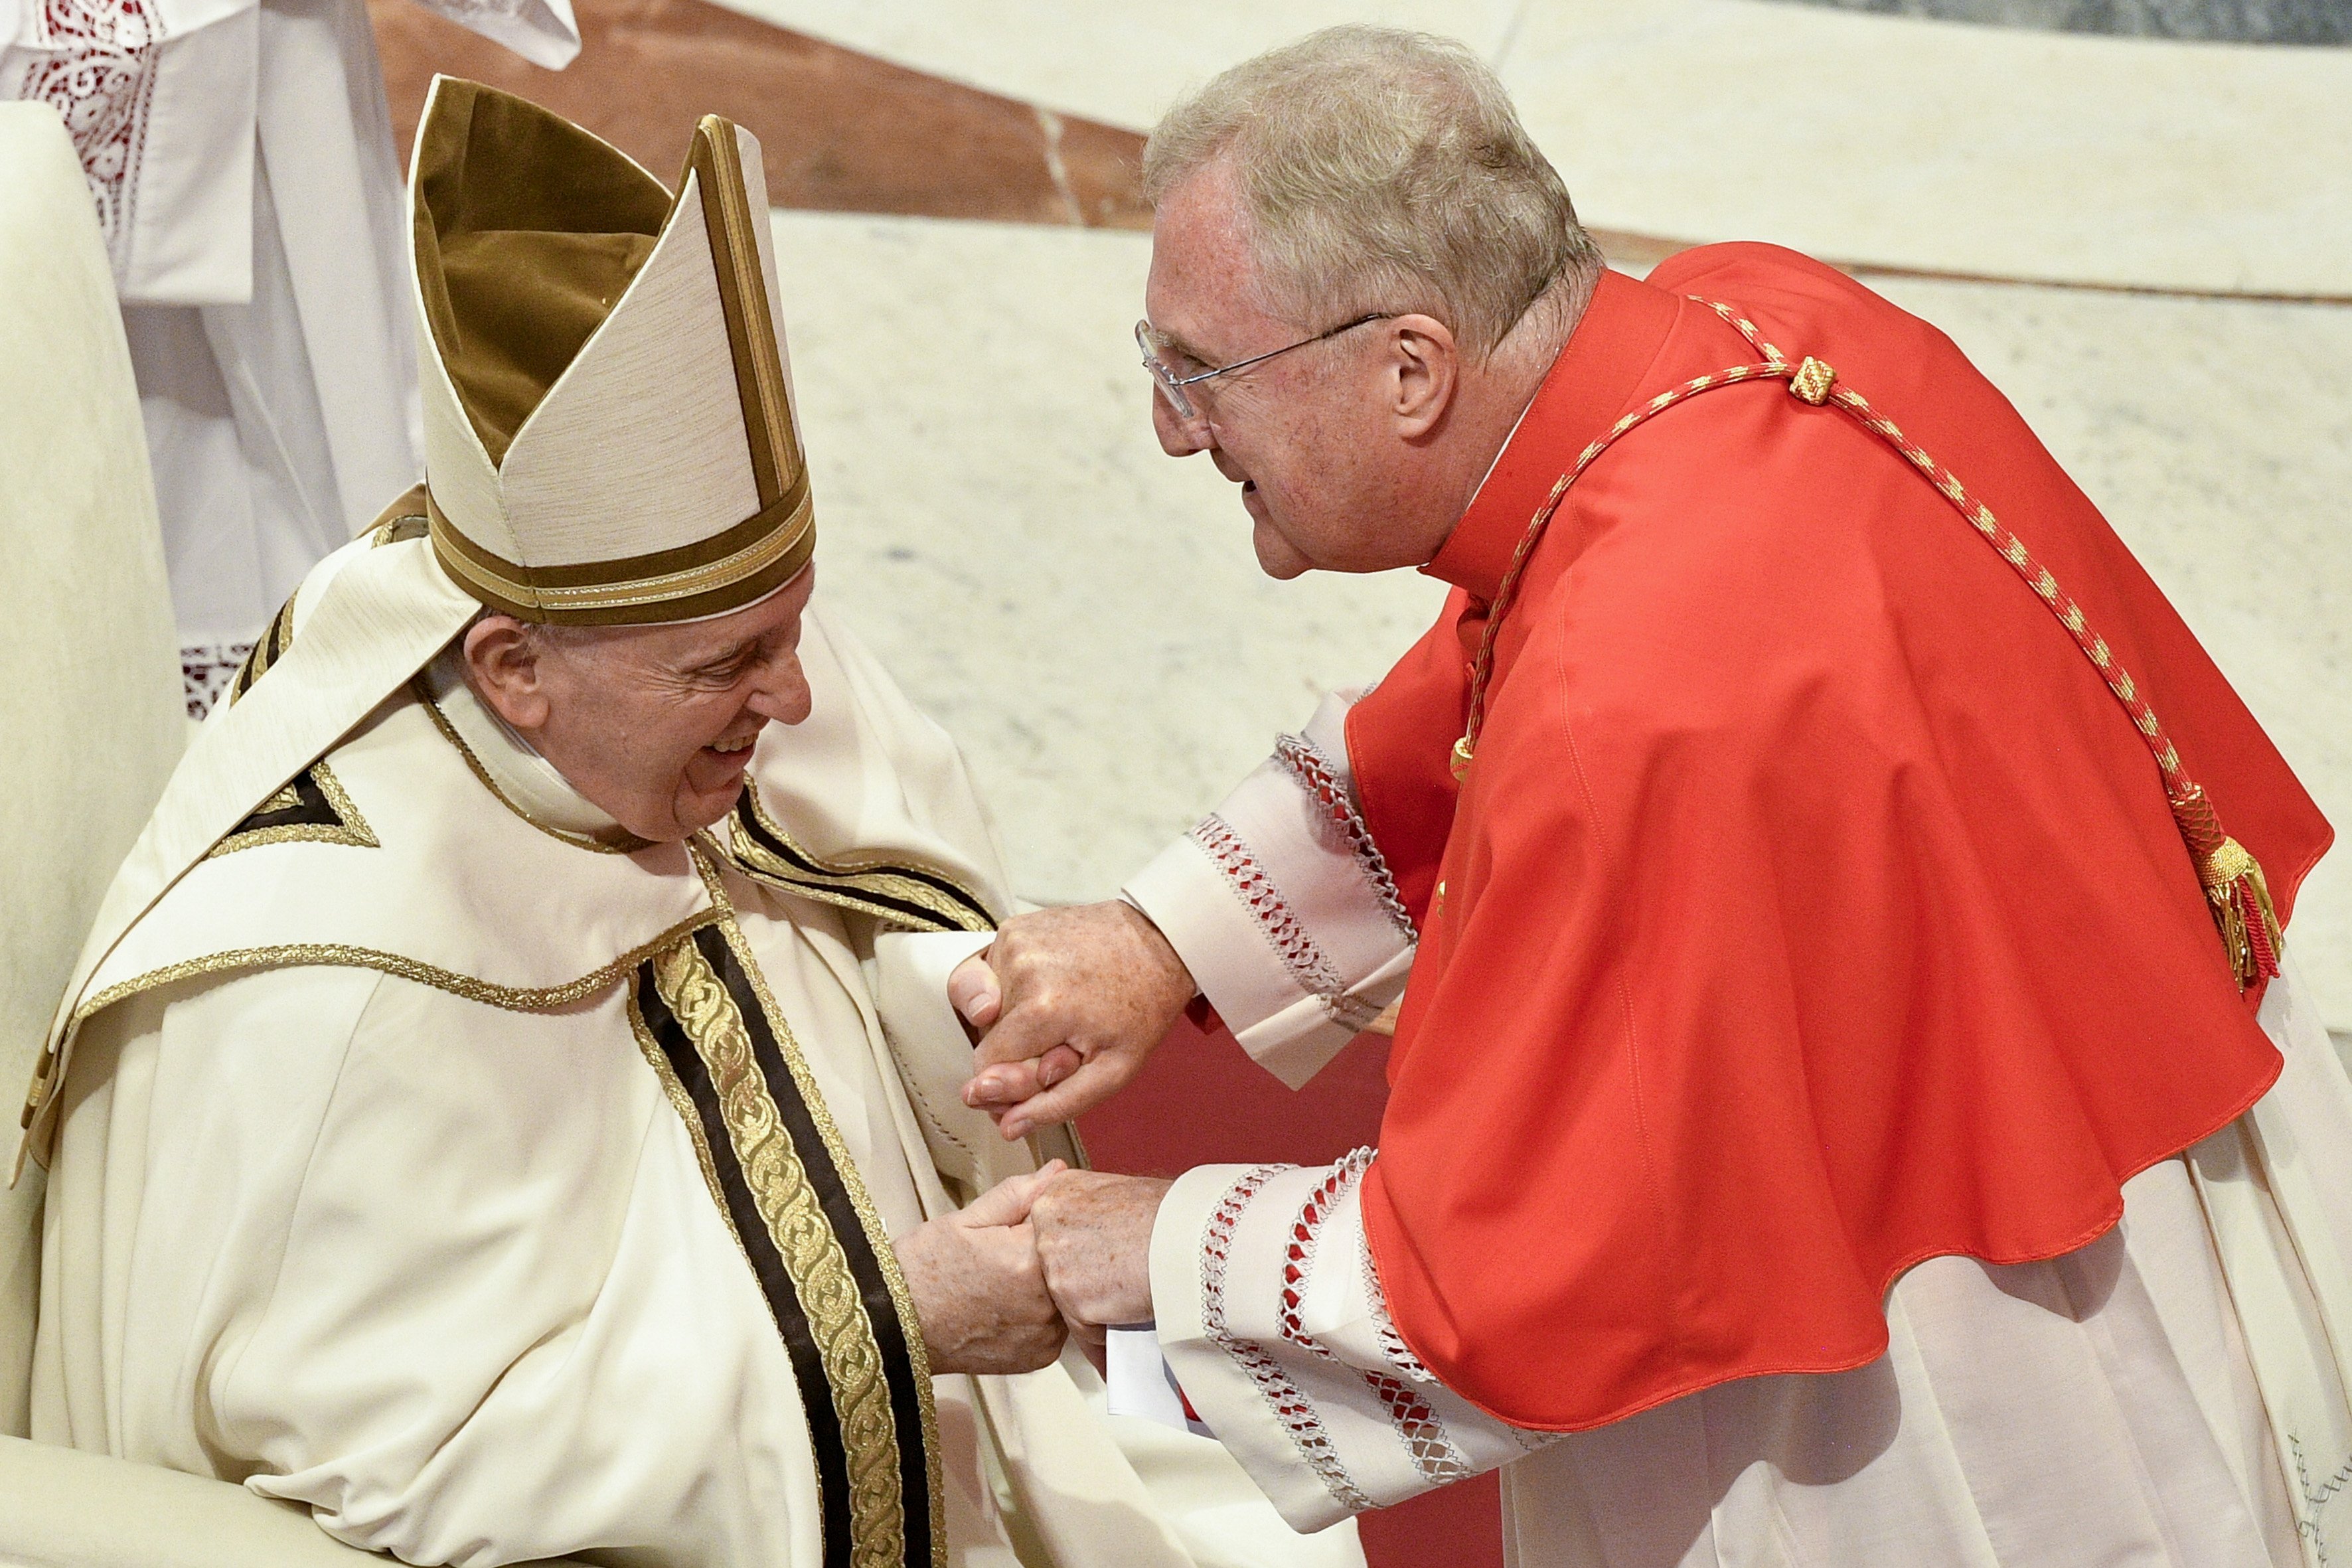 Pope Francis greets new English Cardinal Arthur Roche, prefect of the Dicastery for Divine Worship and the Sacraments, during a consistory for the creation of 20 new cardinals in St. Peter's Basilica at the Vatican Aug. 27, 2022. (CNS photo/Vatican Media)